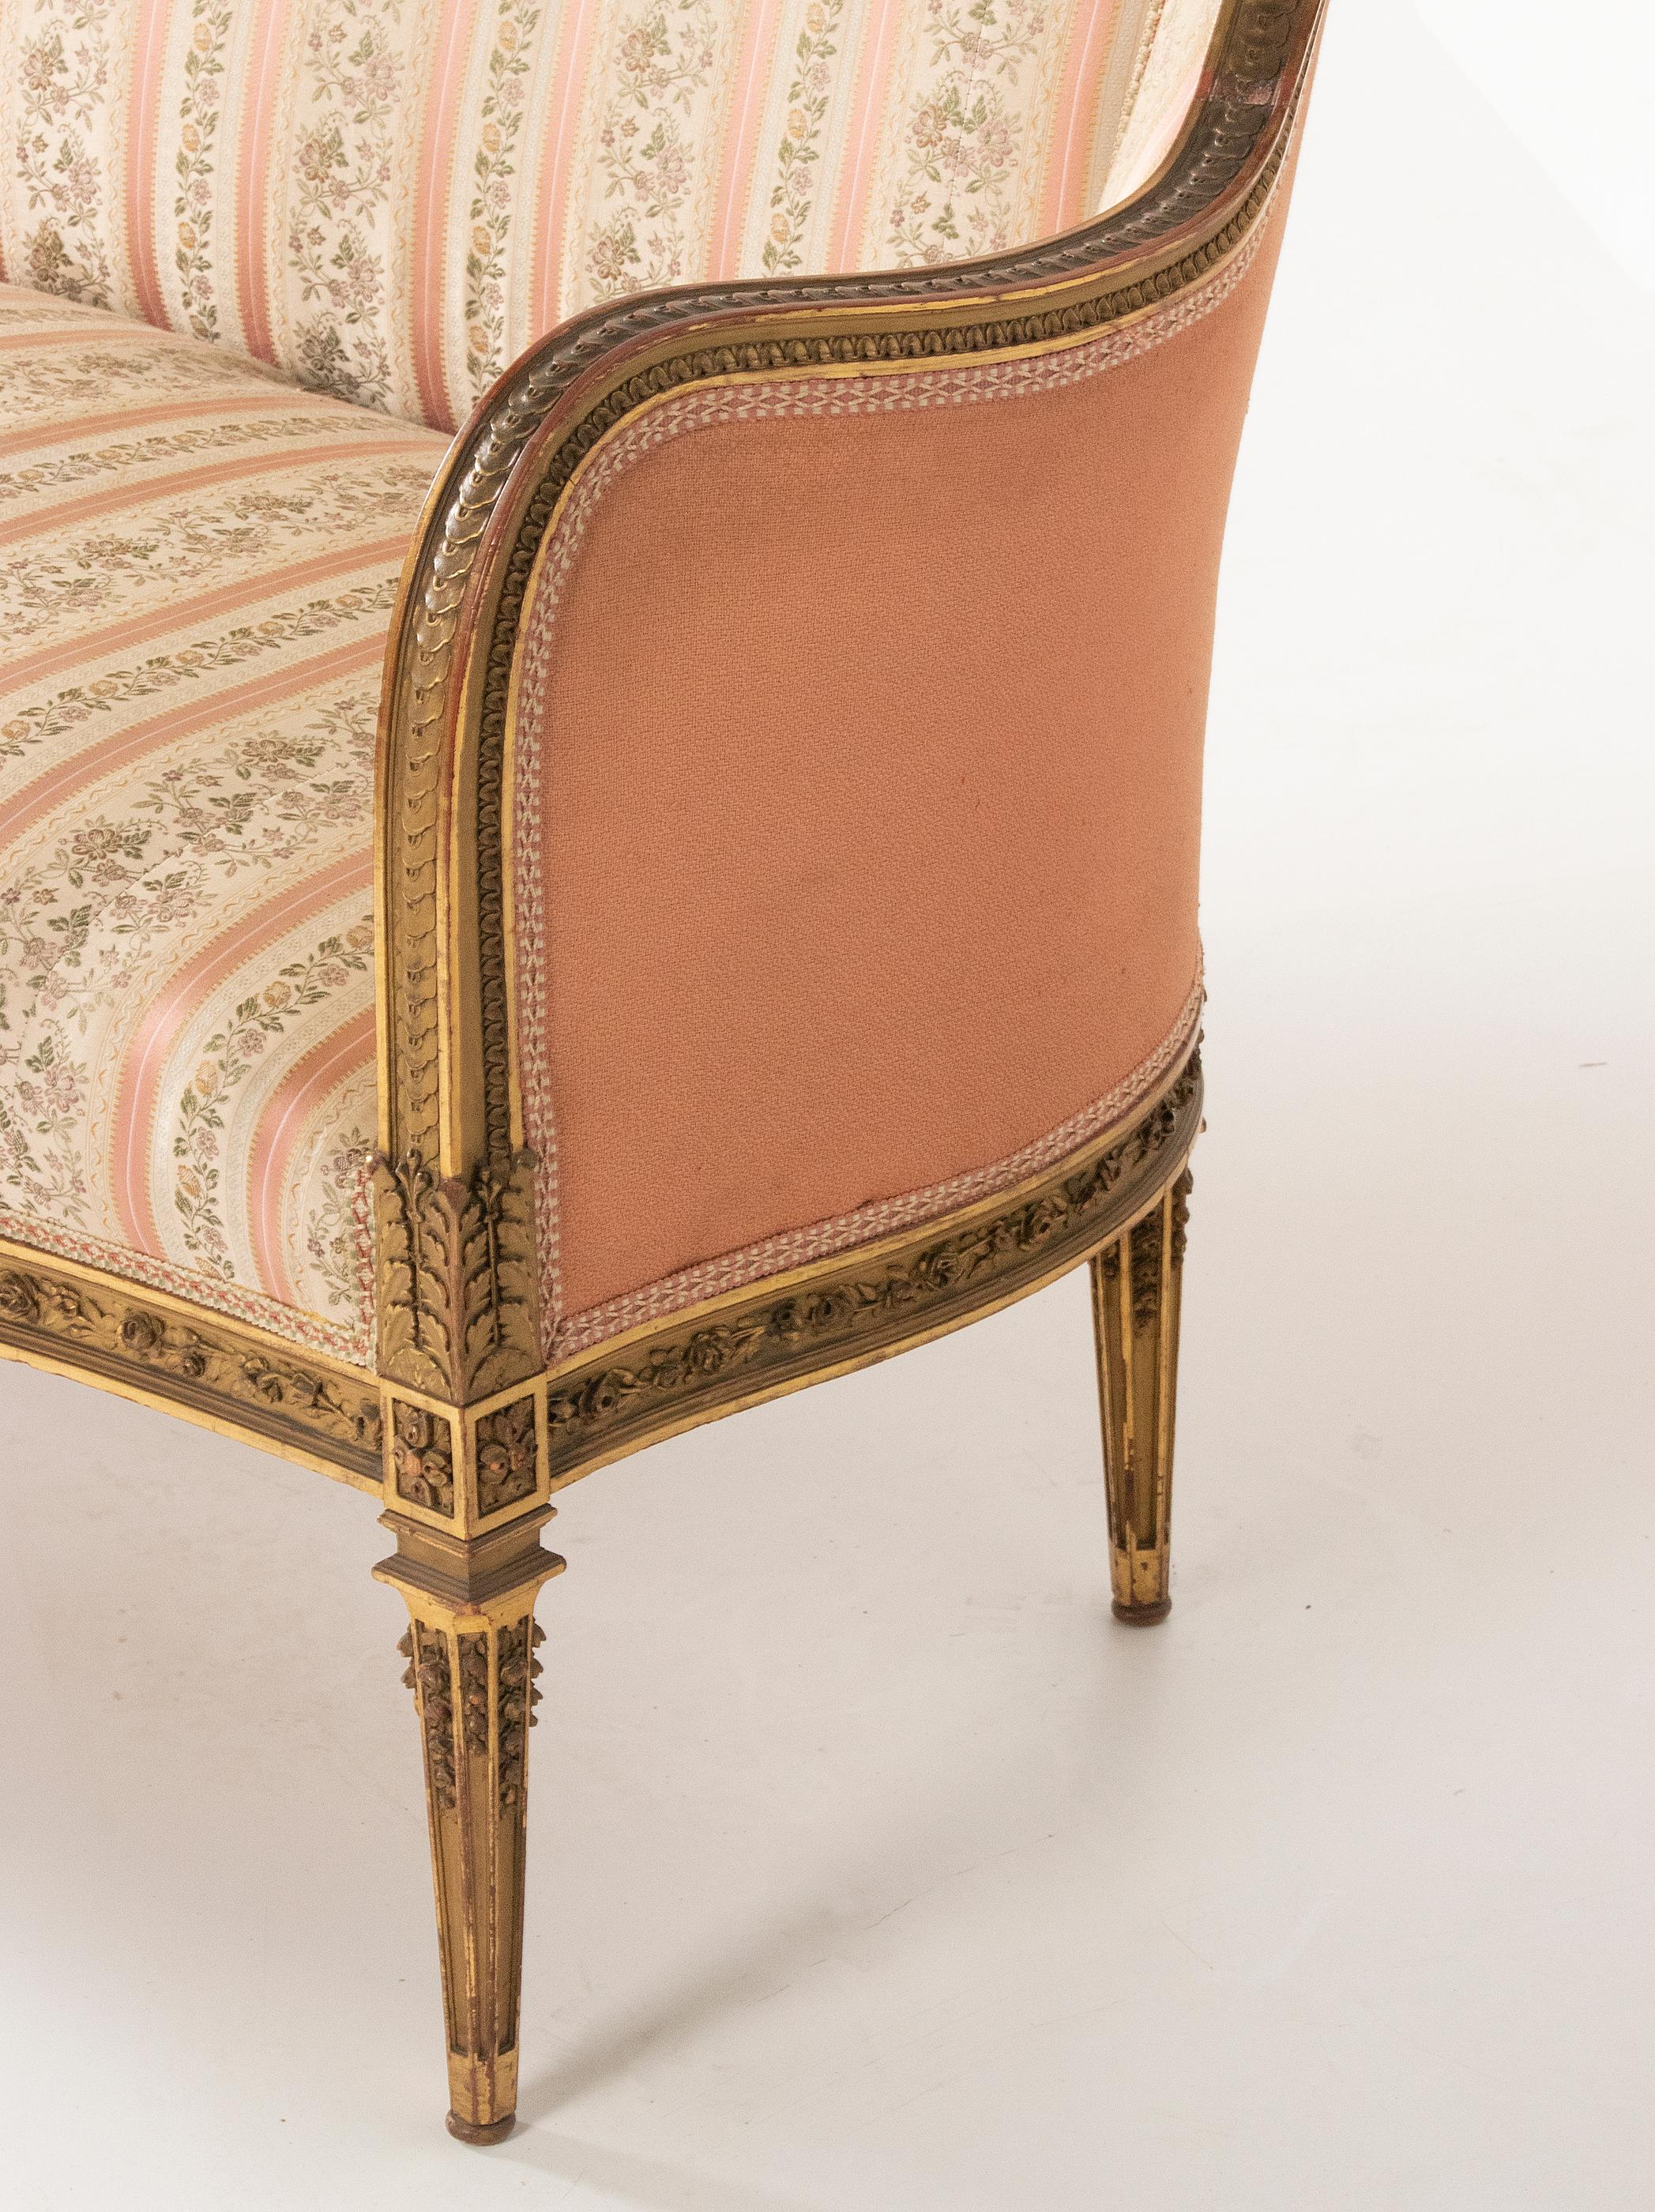 19th Century Wooden and Gilded Salon Suite Louis XVI-Style 4